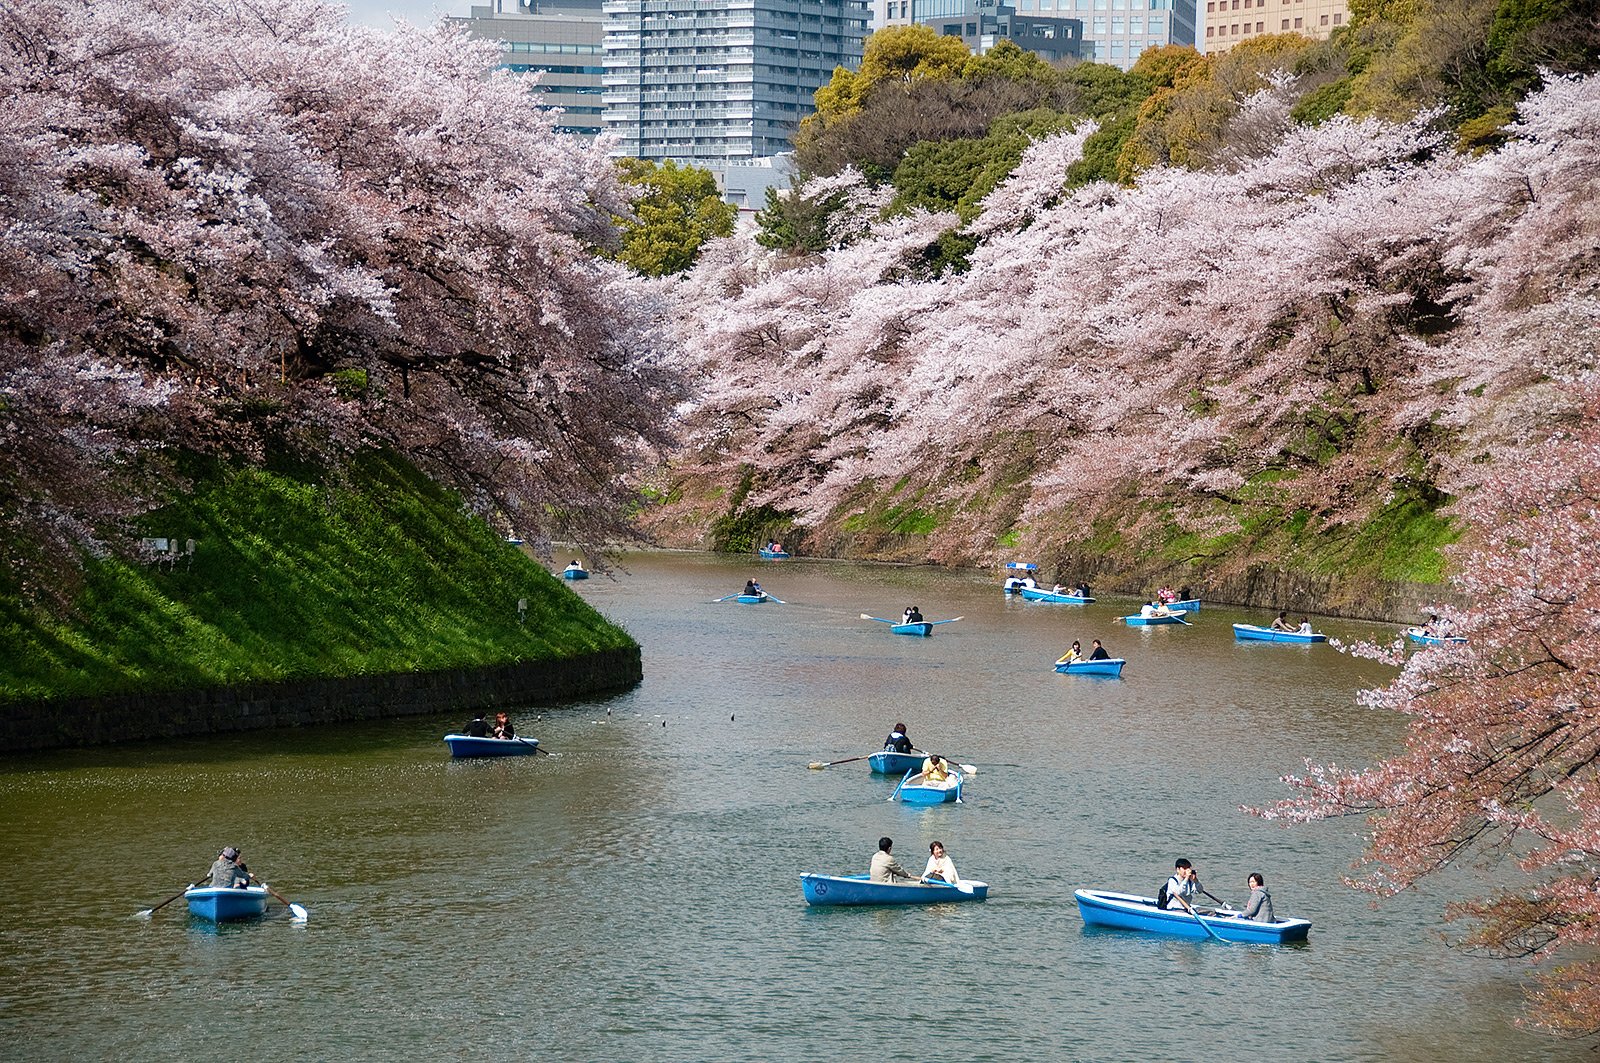 How to take a boat ride among the sakura cherry blossom in Tokyo